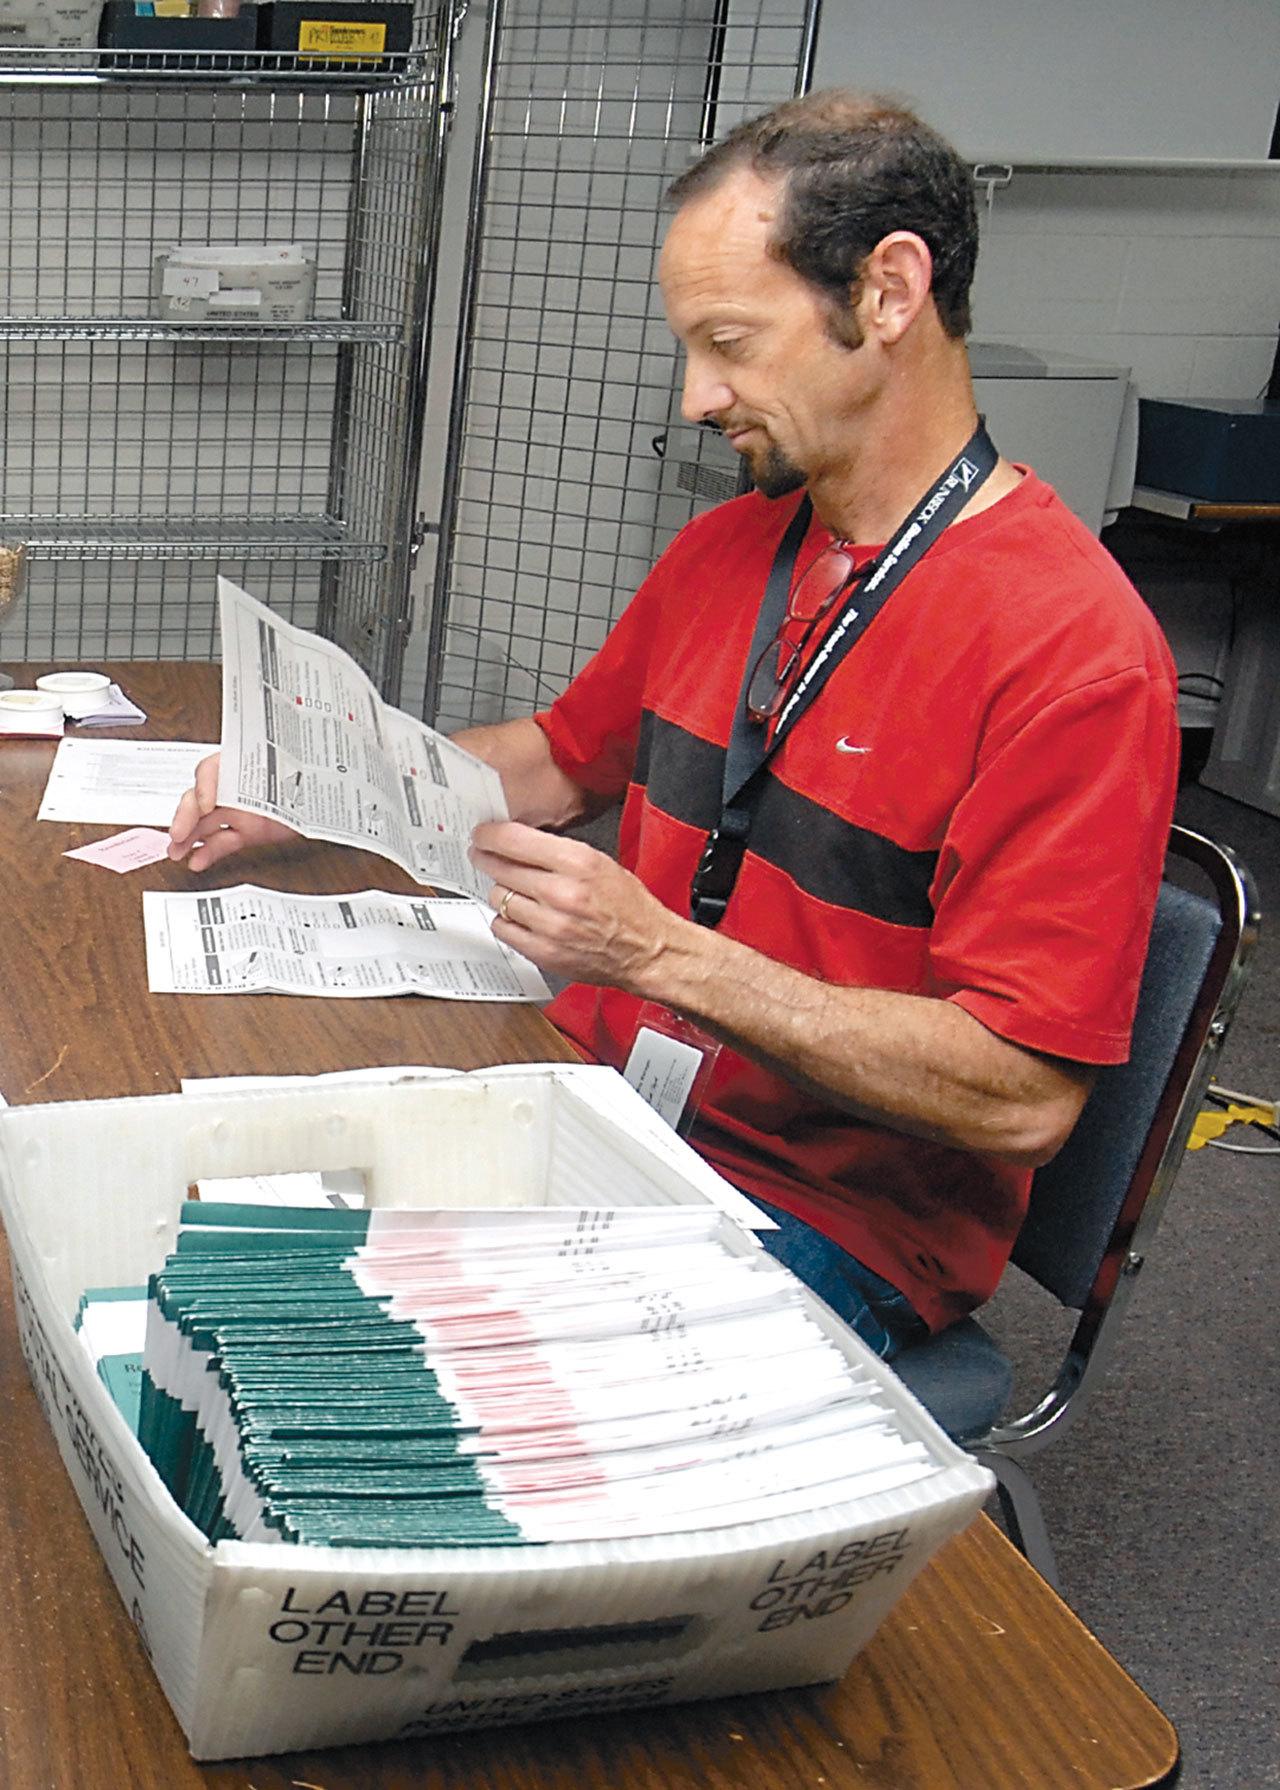 Clallam County Elections Supervisor Ken Hugoniot inspects ballots in August 2015 at the Clallam County Courthouse in Port Angeles. (Keith Thorpe/Peninsula Daily News)